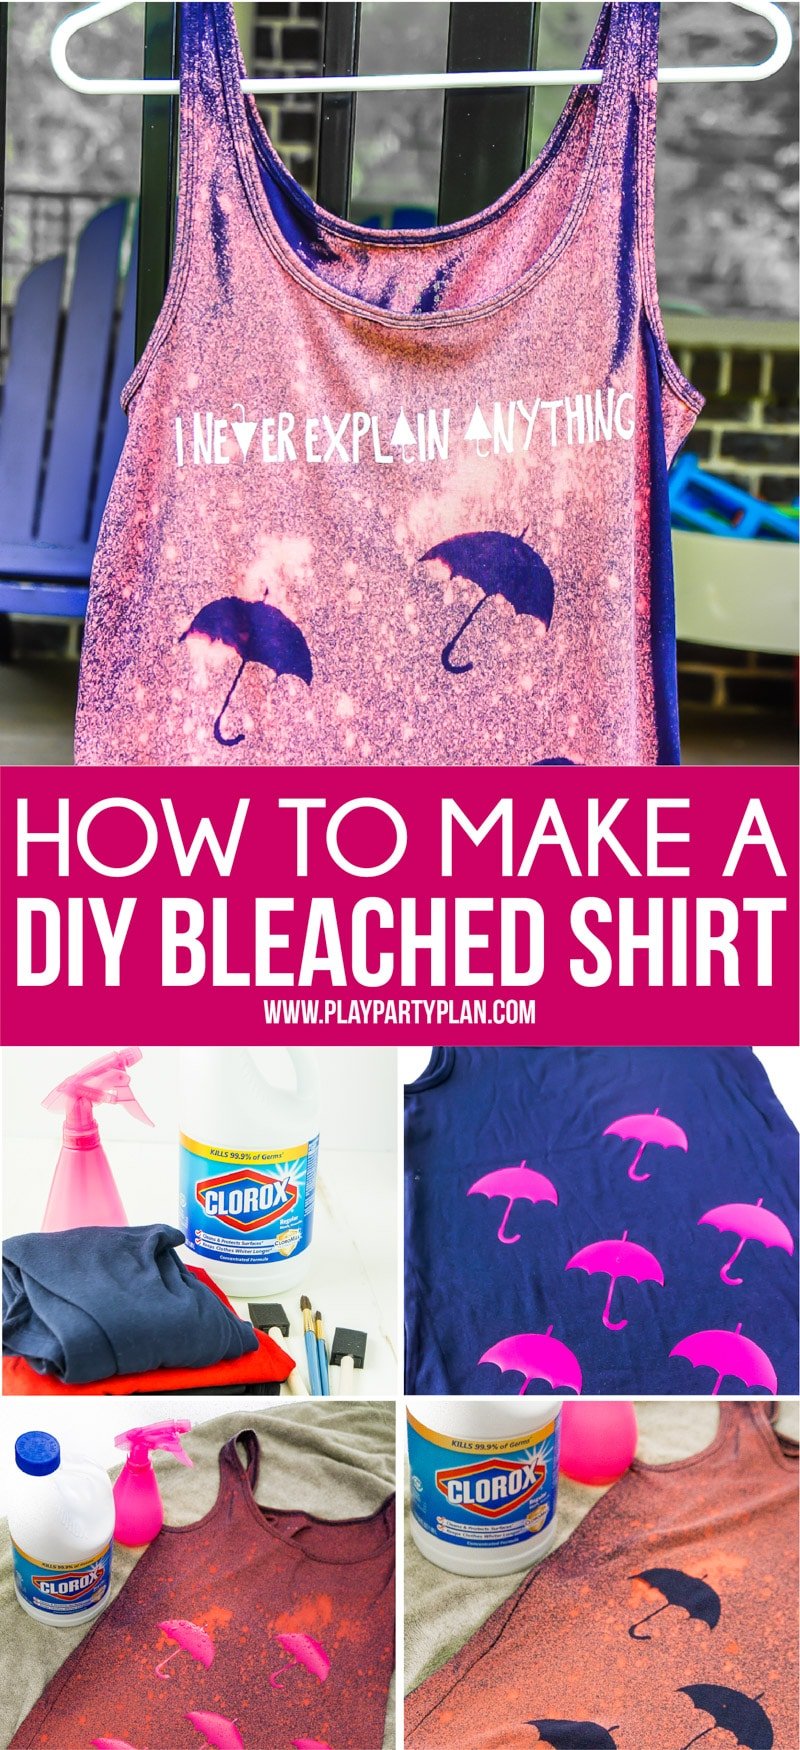 A collage of photos showing how to make a bleached shirt